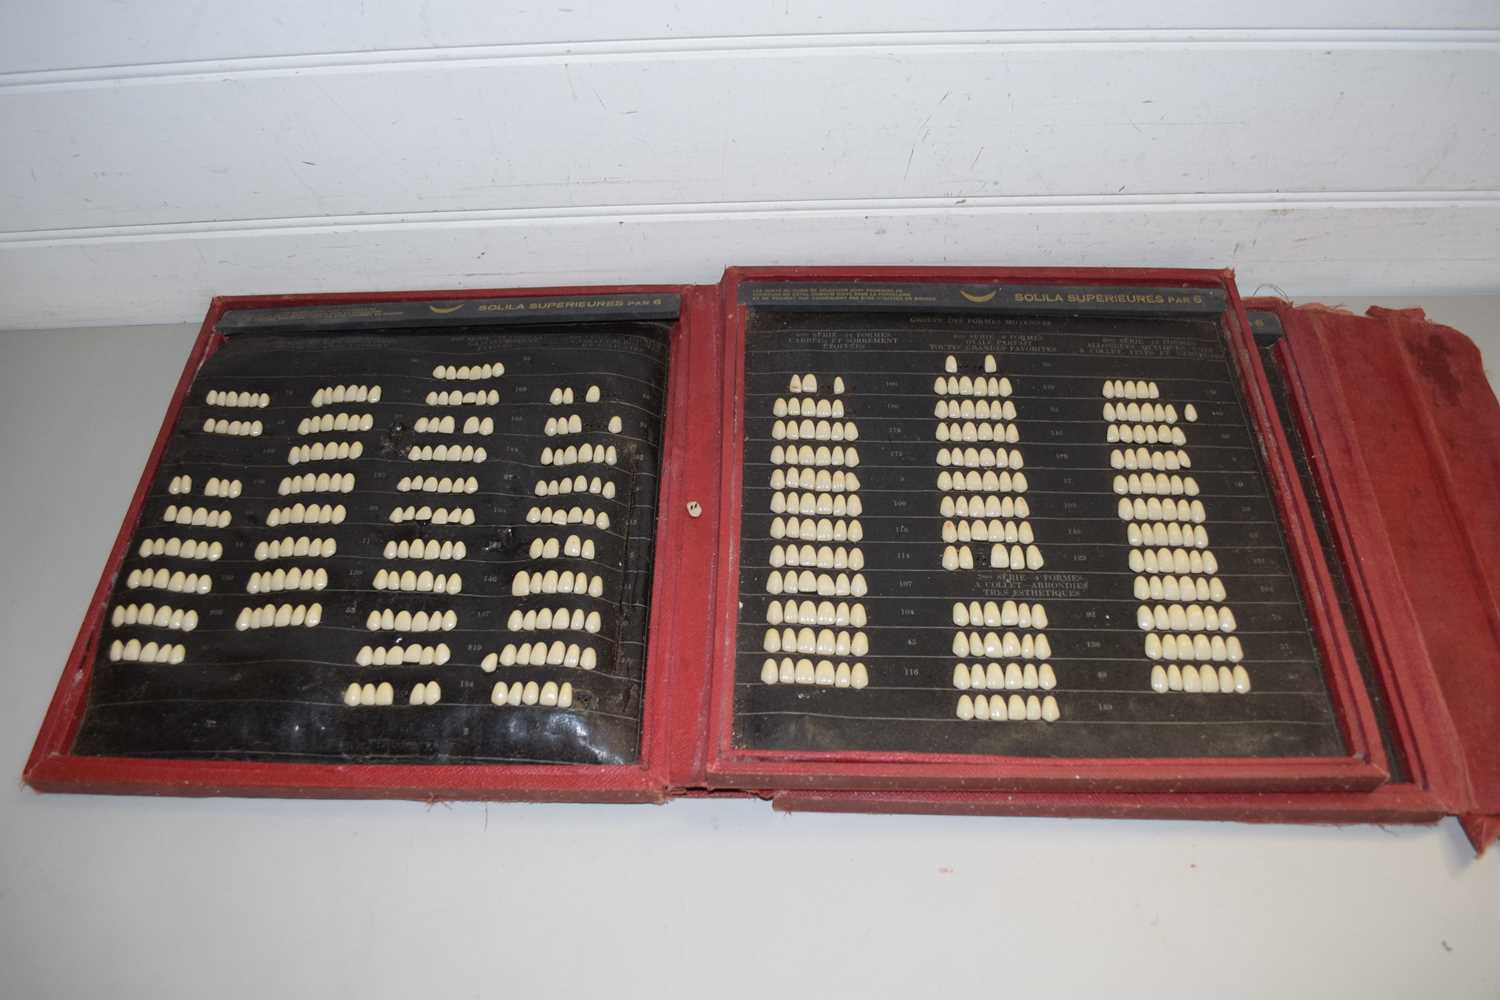 CASED FRENCH DENTAL DISPLAY OF TEETH MARKED 'SOLILA SUPERIEURES PAR 6'